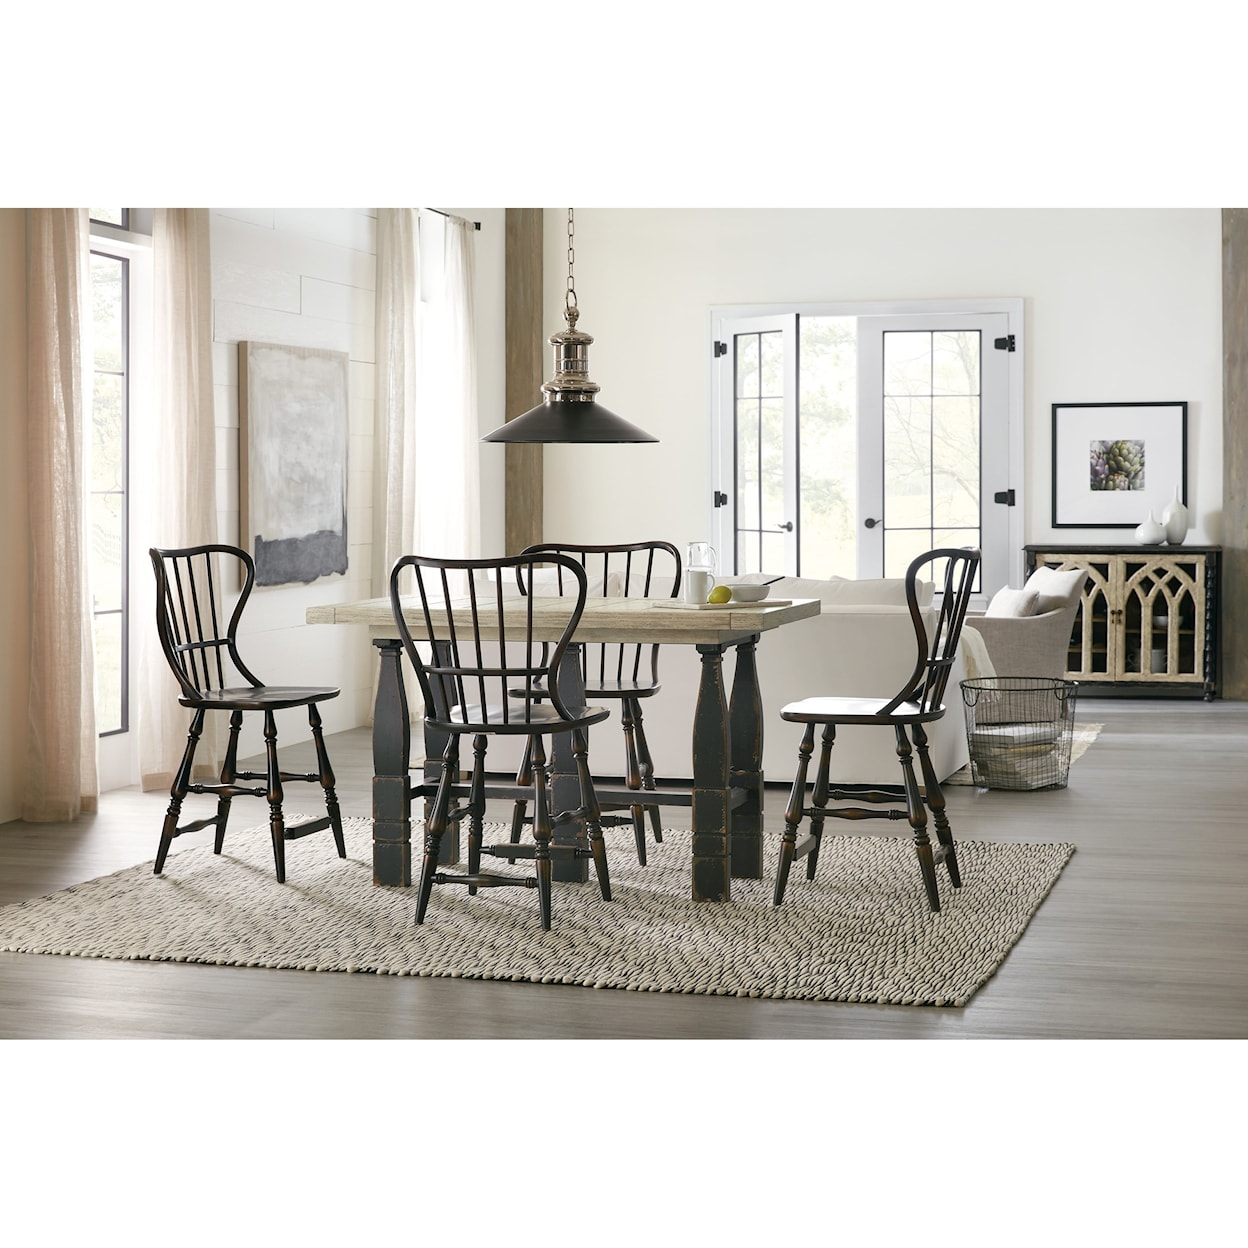 Hooker Furniture Ciao Bella Friendship Table